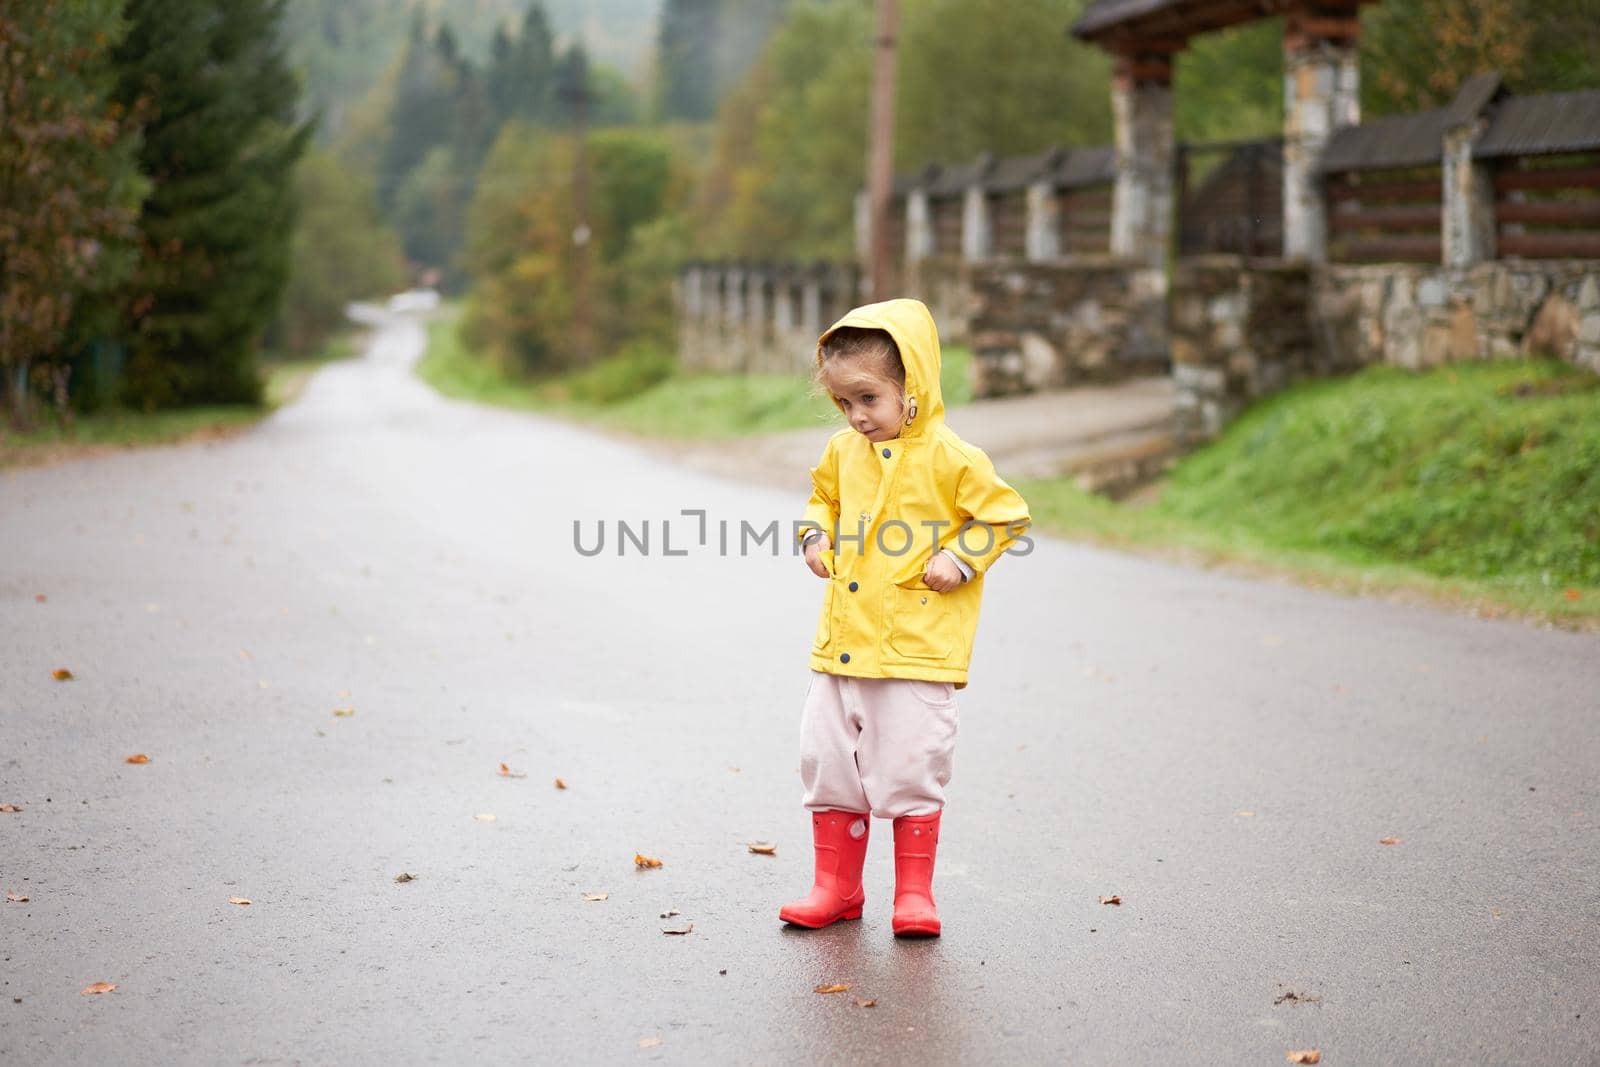 Playful girl wearing yellow raincoat while jumping in puddle during rainfall by andreonegin